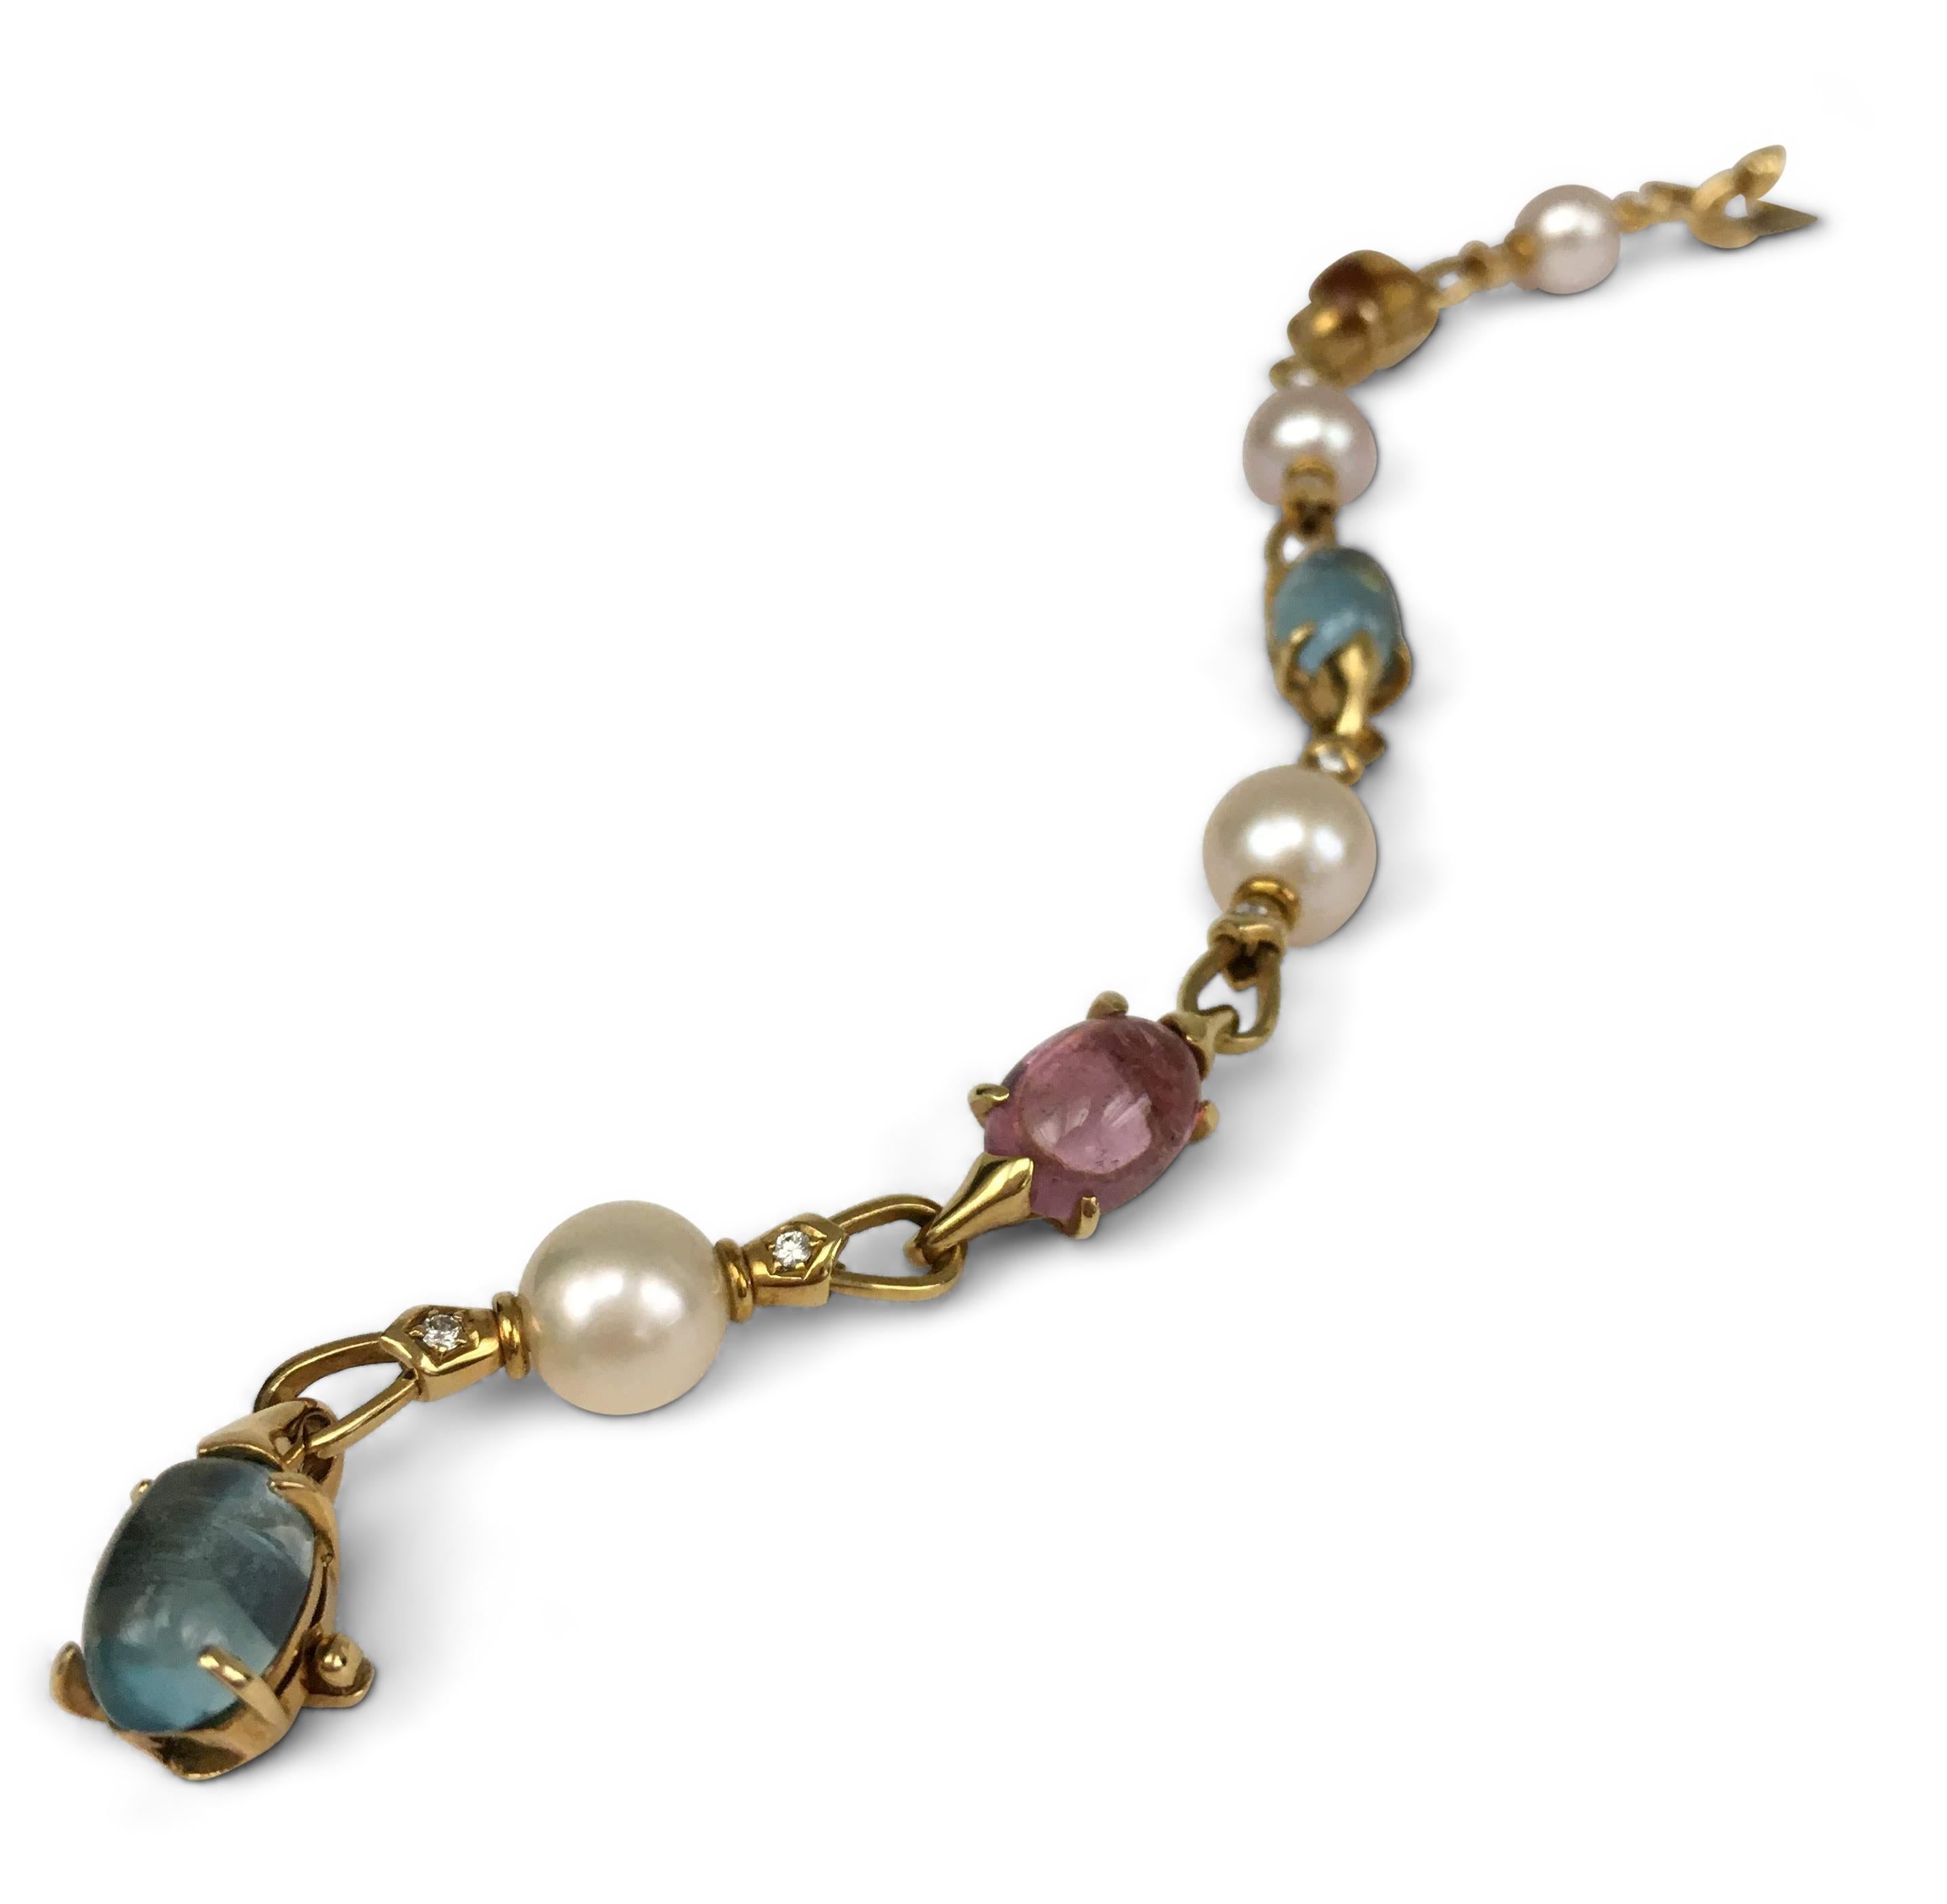 Authentic Bulgari Allegra bracelet crafted in 18 karat yellow gold and set with cabochon-cut blue topaz, citrine, and tourmaline stones alternating with cultured pearls. The bracelet links are accented with round brilliant cut diamonds weighing an